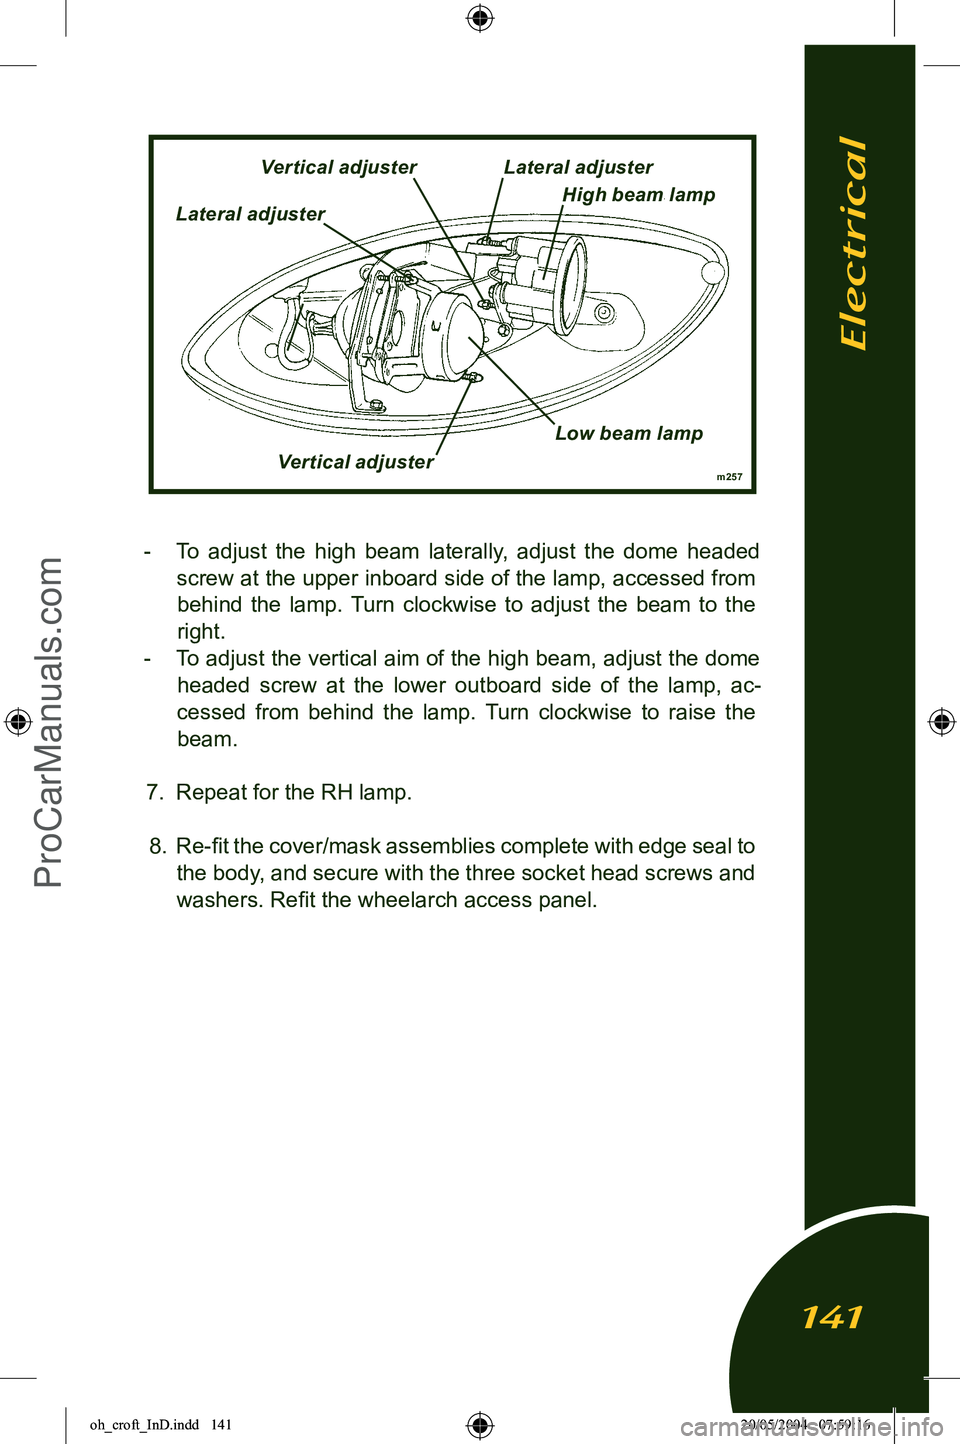 LOTUS ELISE 2005 Service Manual 
-  To  adjust  the  high  beam  laterally,  adjust  the  dome  headed screw at the upper inboard side of the lamp, accessed from behind  the  lamp.  Turn  clockwise  to  adjust  the  beam  to  the 
r